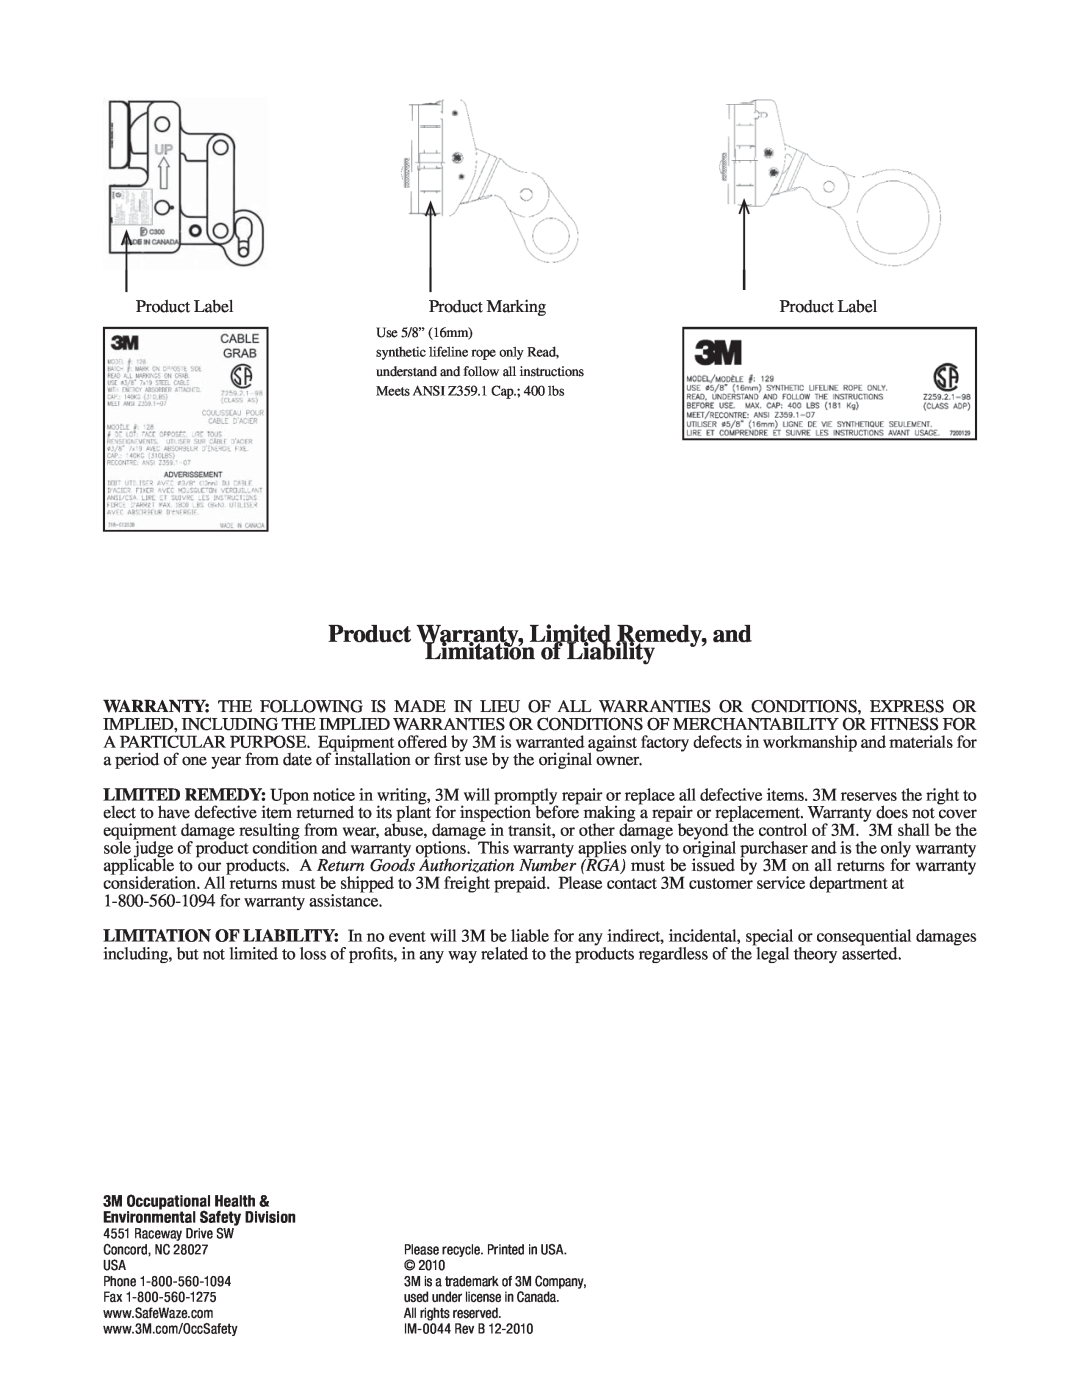 3M 129, 124, 123 manual Product Warranty, Limited Remedy, and, Limitation of Liability 